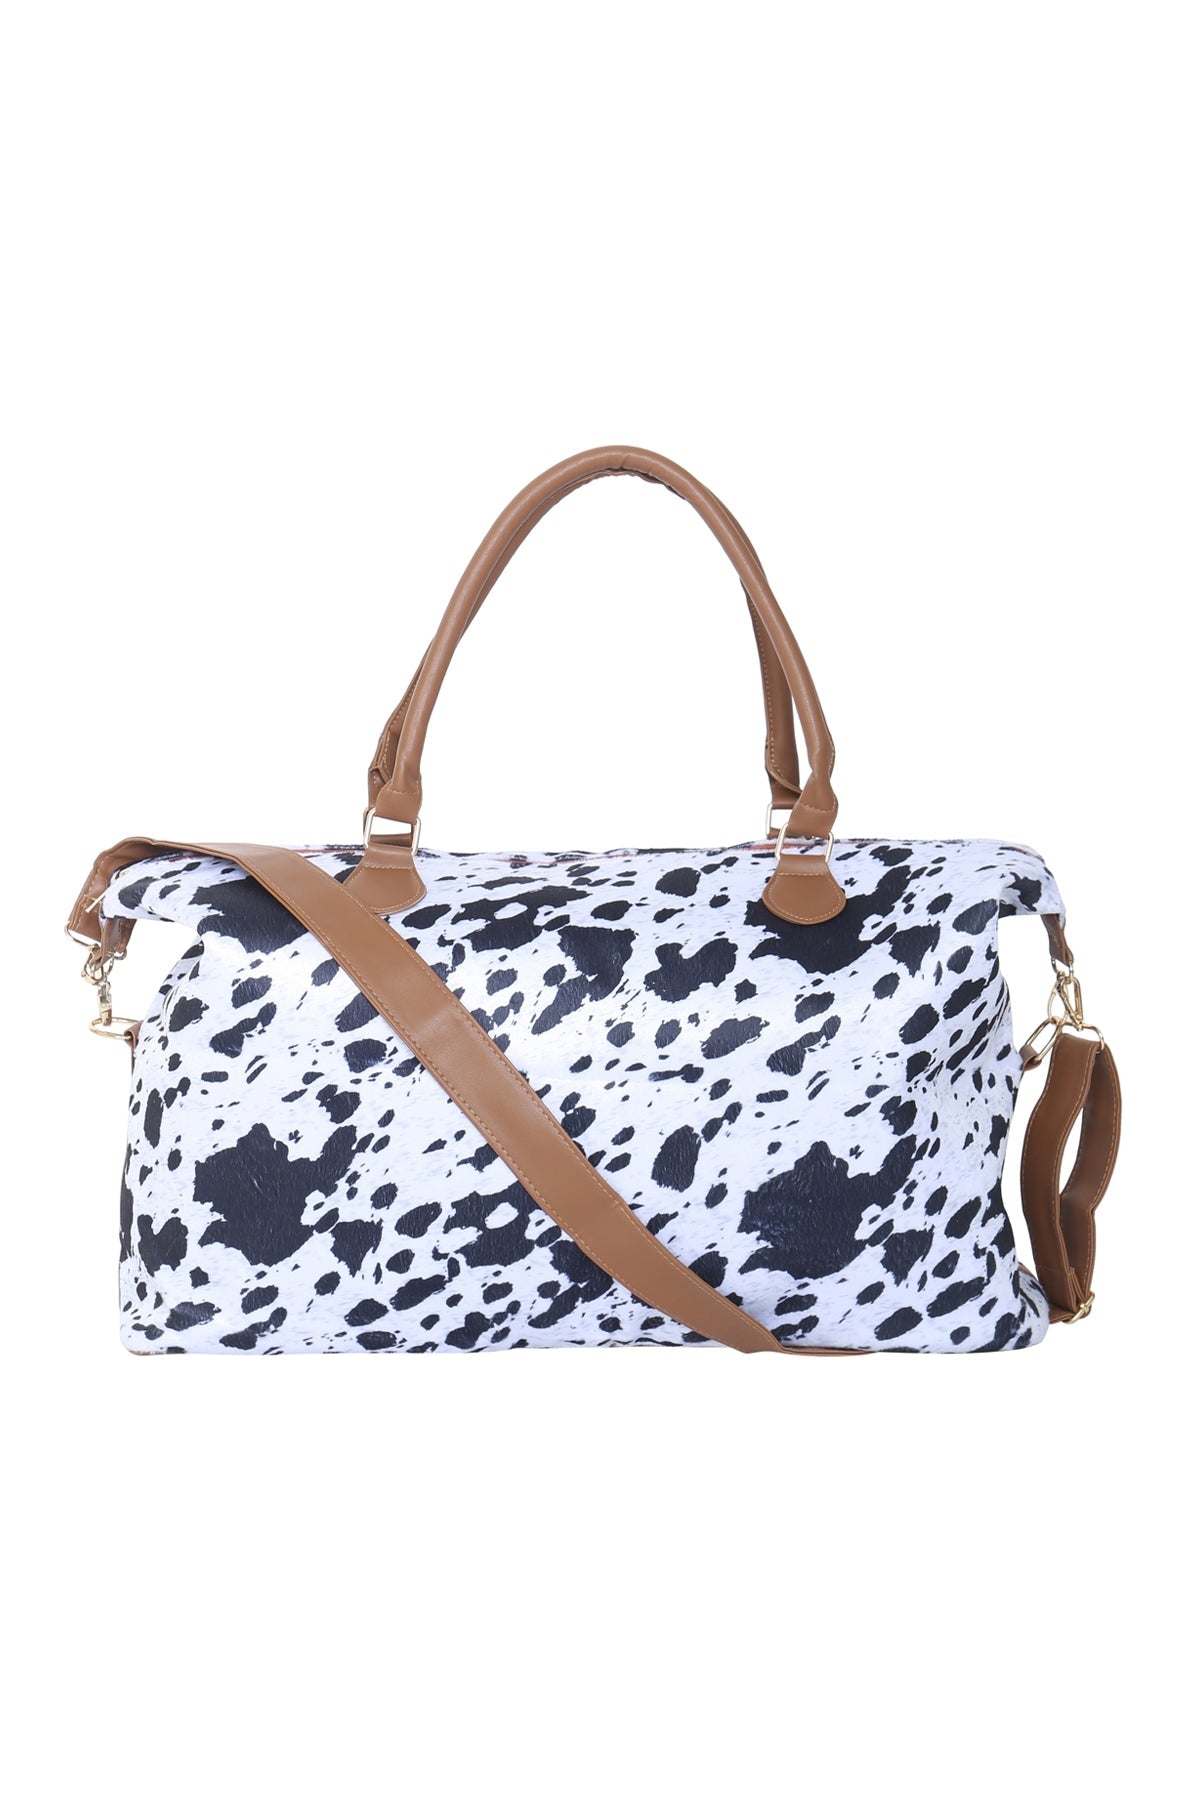 COW PRINT SLING TOTE BAG W/ REMOVABLE STRAP